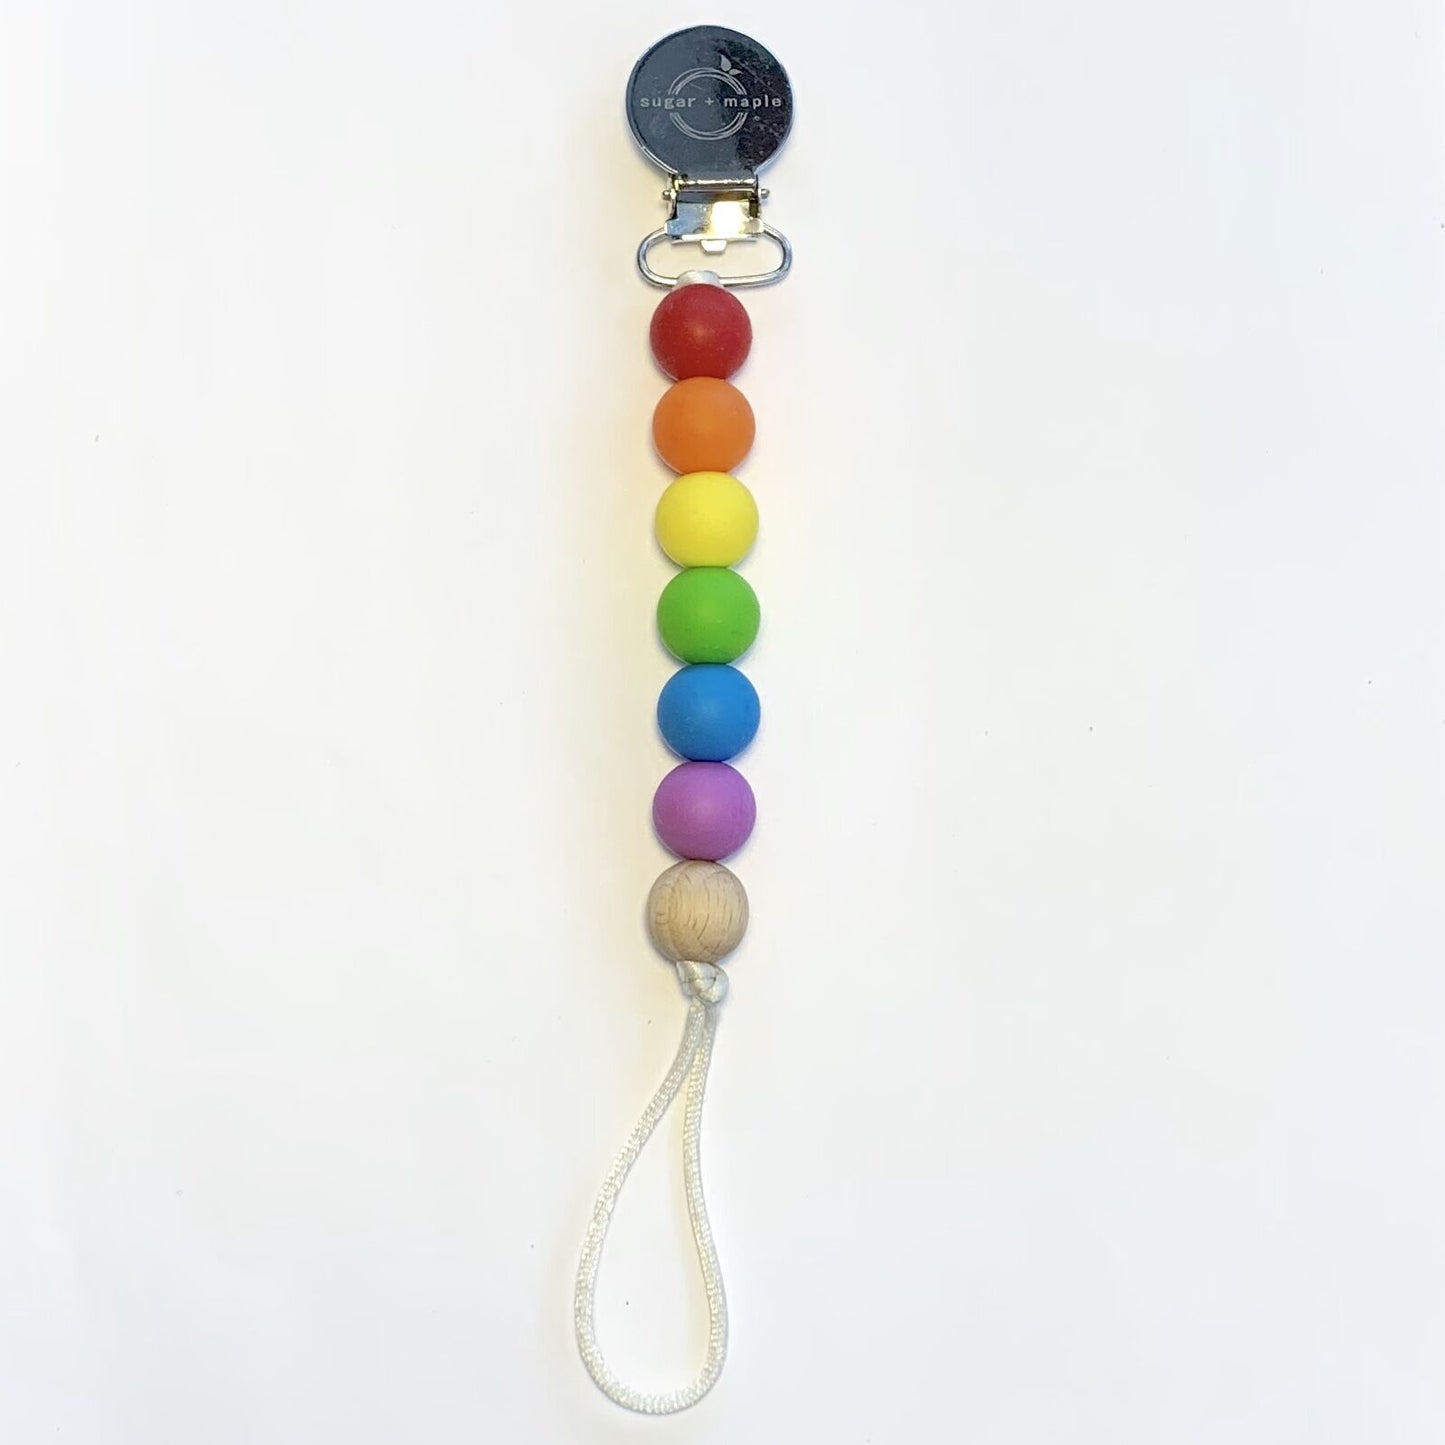 SUGAR + MAPLE PACI AND TEETHER CLIP